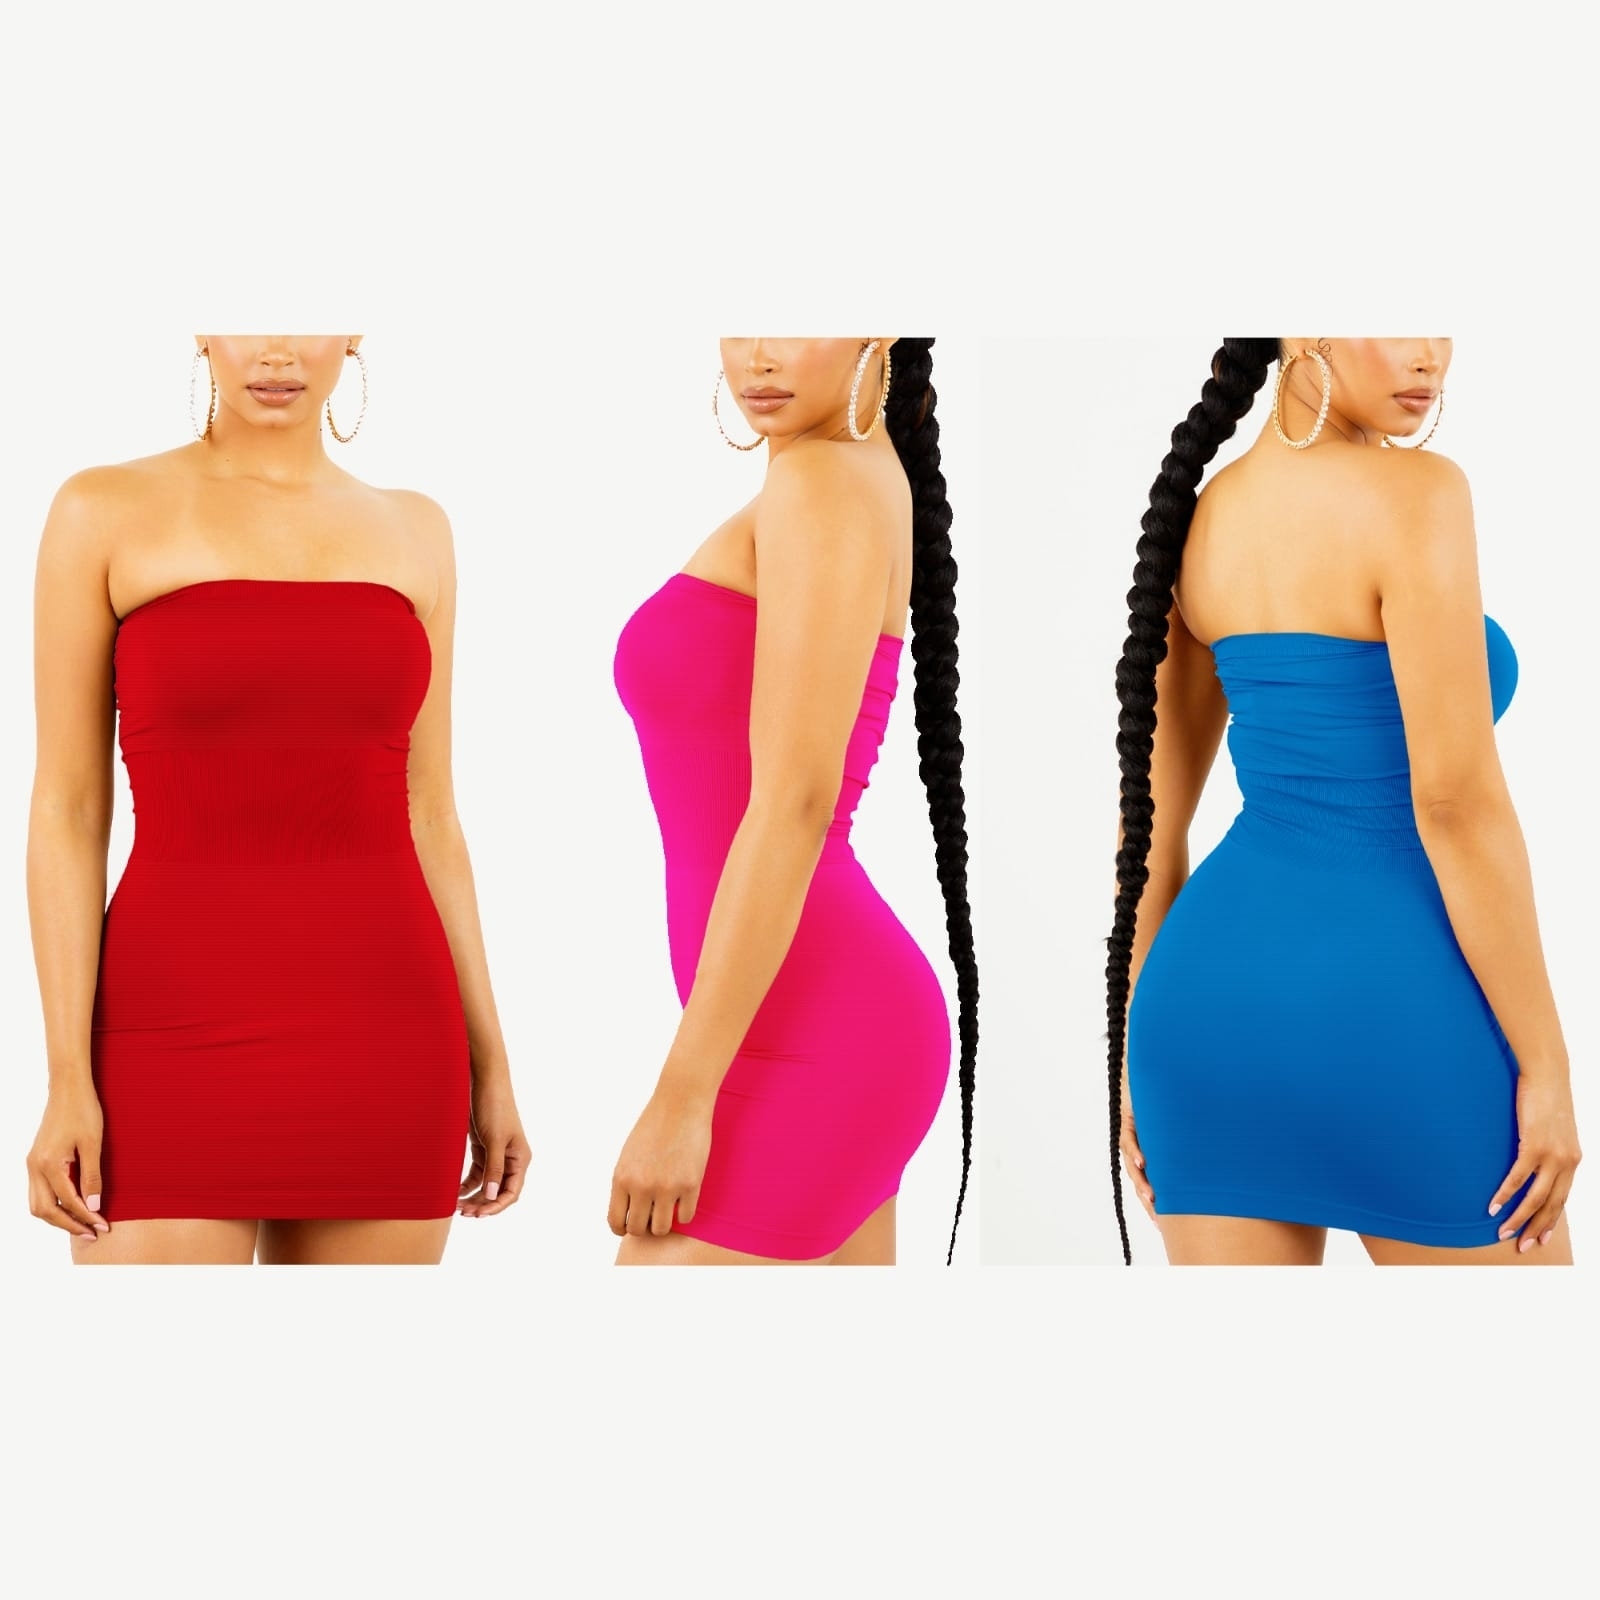 3-Pack Women's Strapless Stretchy Seamless Tight Fit Body Con Mini Tube Top Dress - PINK, S